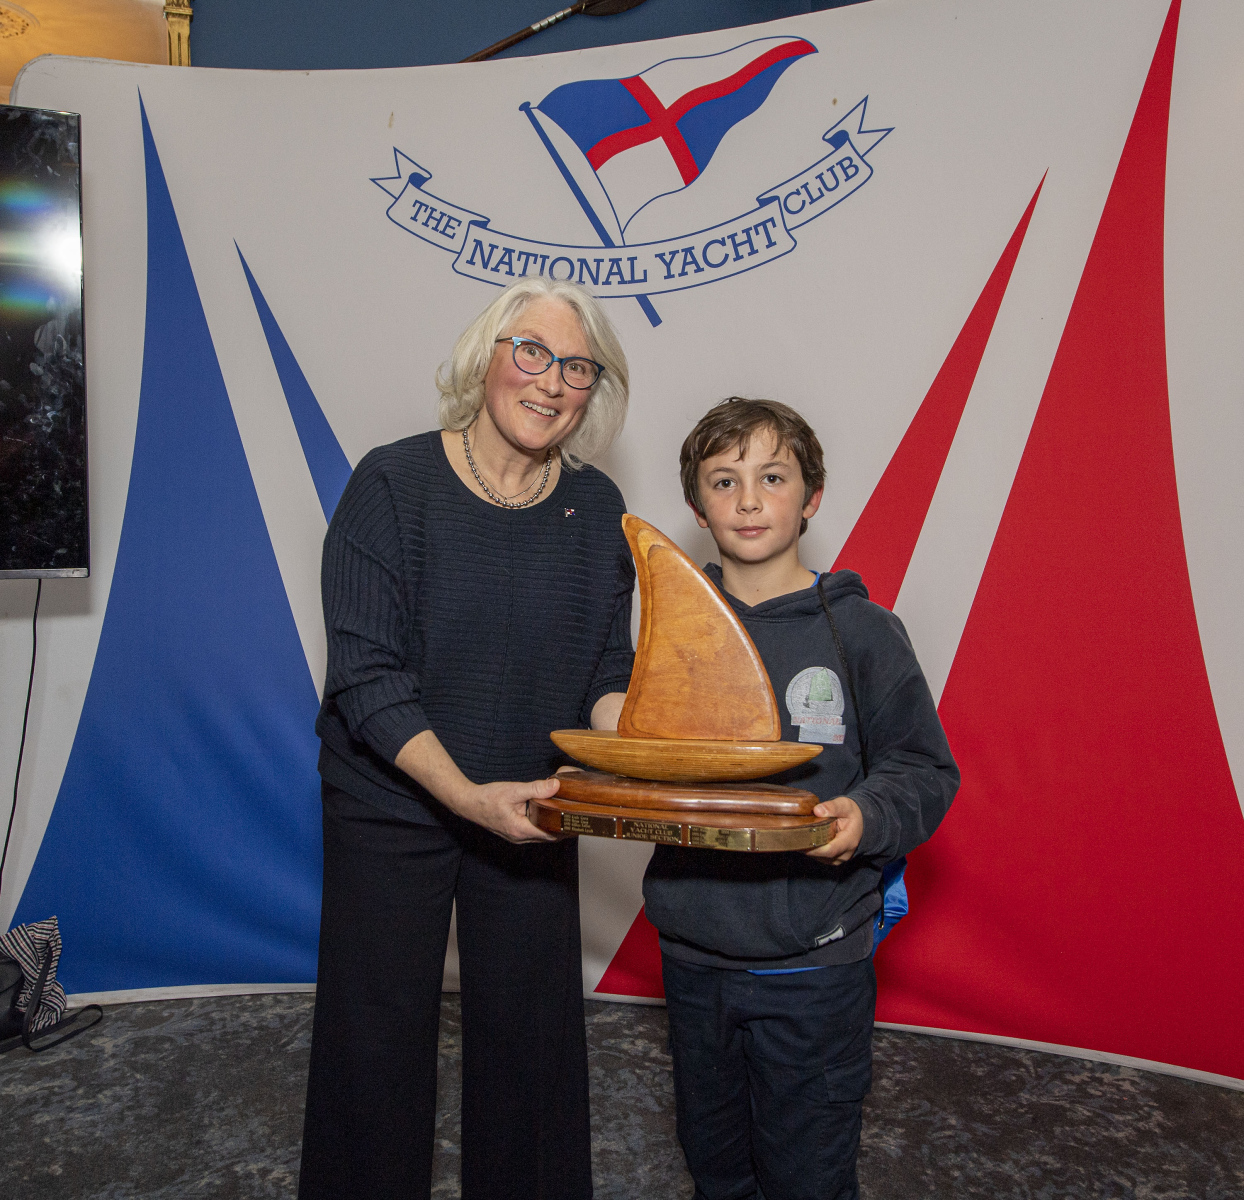 Rosemary Cadogan 
Vice Commodore of the National Yacht Club  
Junior Optimist Fleet

2nd Prize – Aurele Dion(2nd ranked NYC sailor)Trophy 
 

*****No Reproduction Fee *****

 Pic © Michael Chester  
Phone 0878072295 
info@chester.ie from 
www.chester.ie